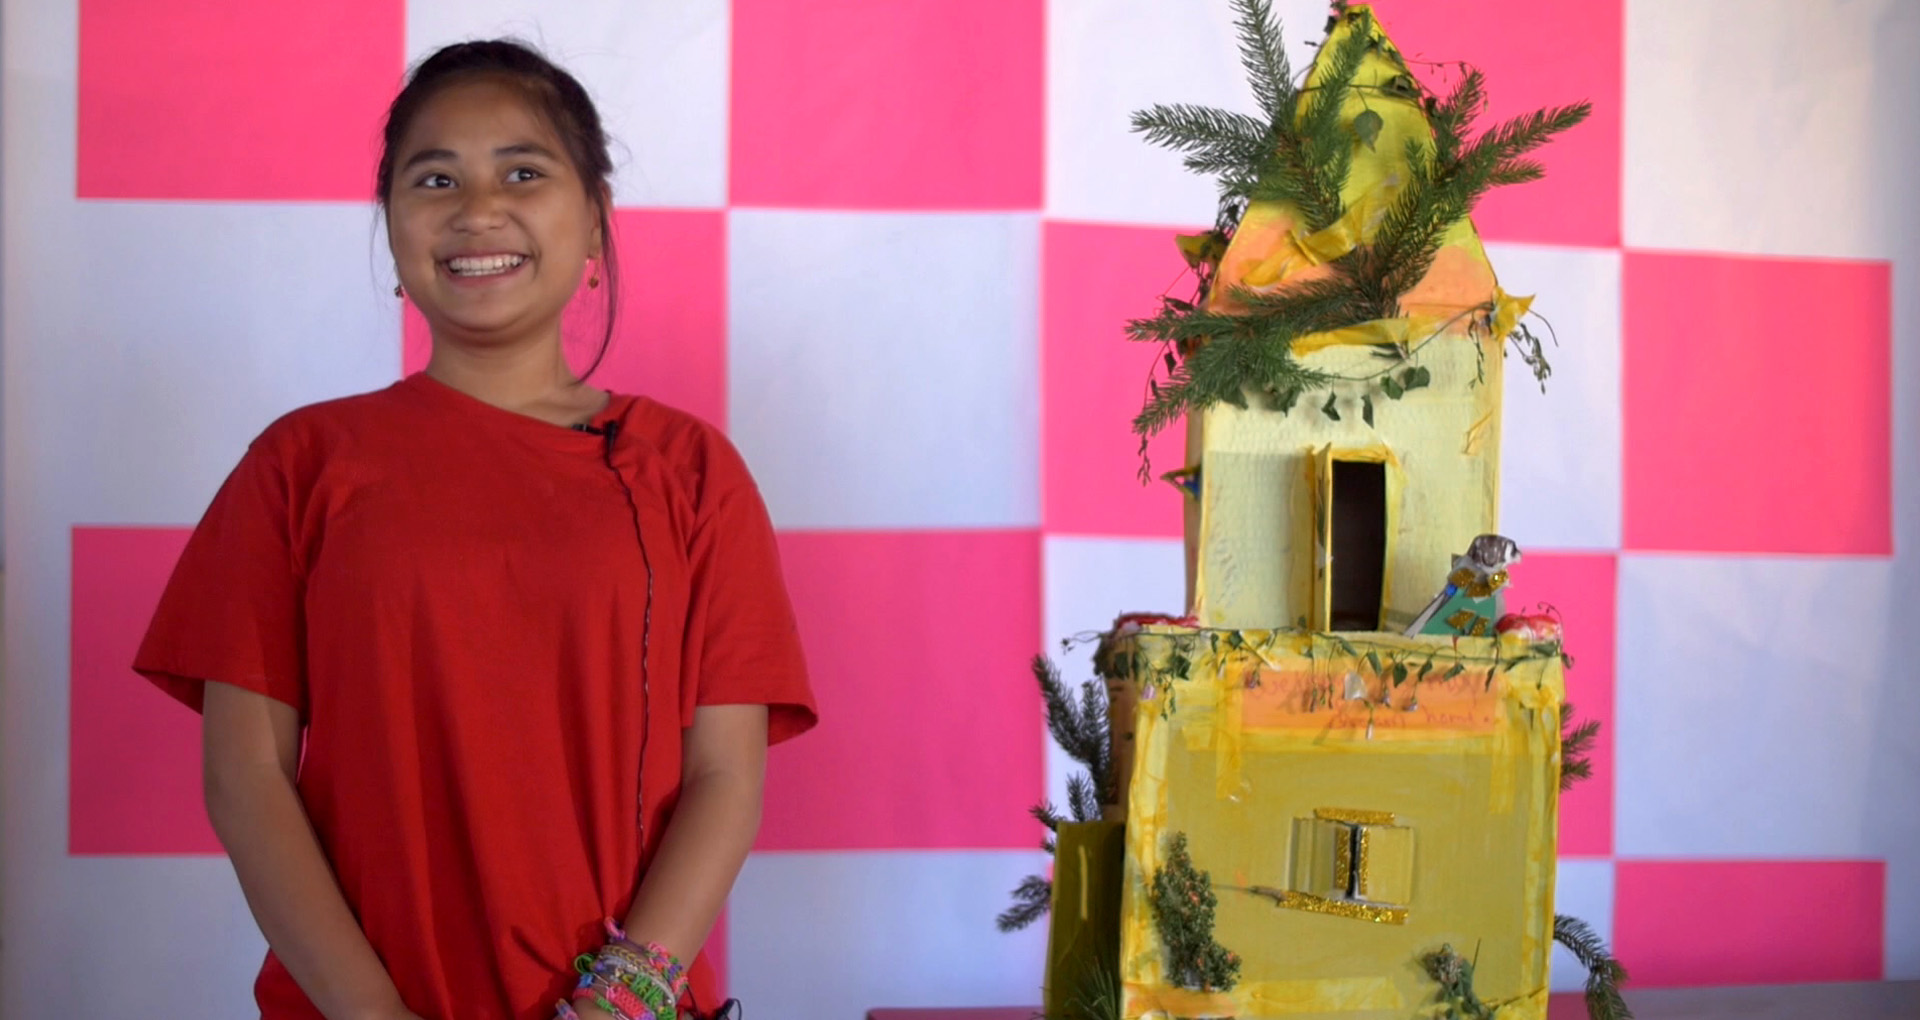 little girl in red tshirt in front of a pink and white background, in front of a cardboard castle painted yellow